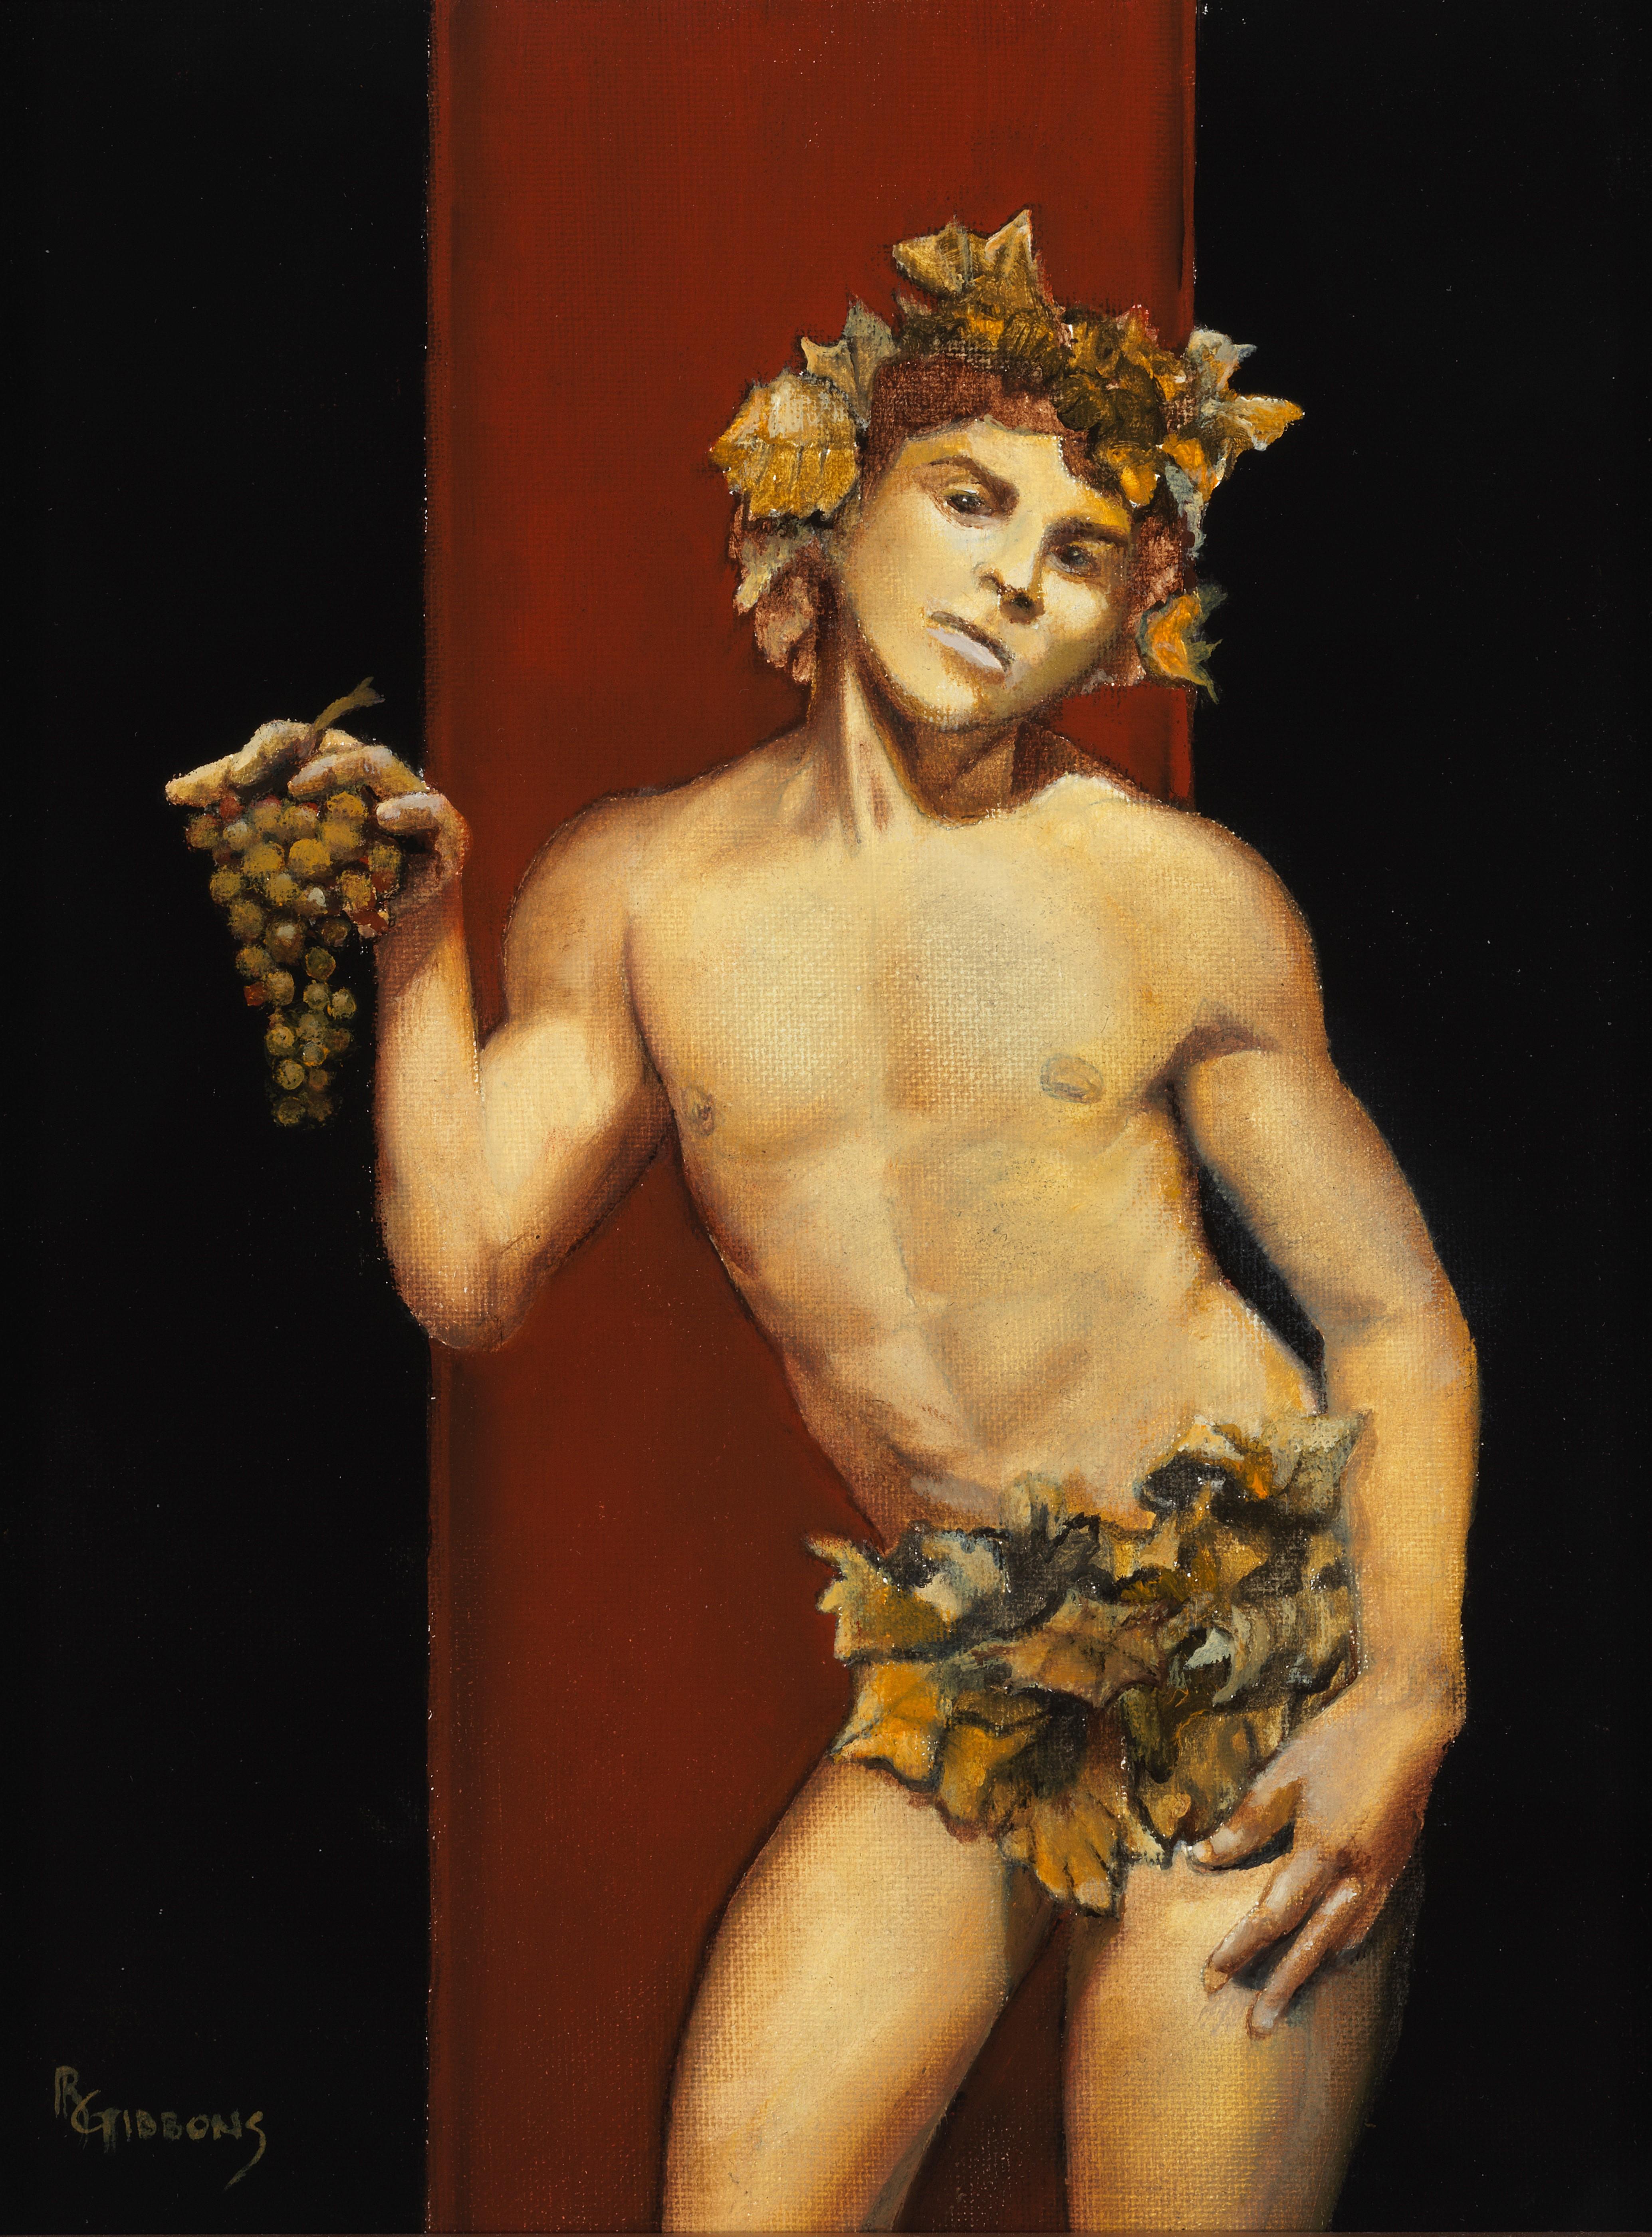 Richard Gibbons Nude Painting - Young Bacchus - Partially Nude Male on Burgundy and Black Background